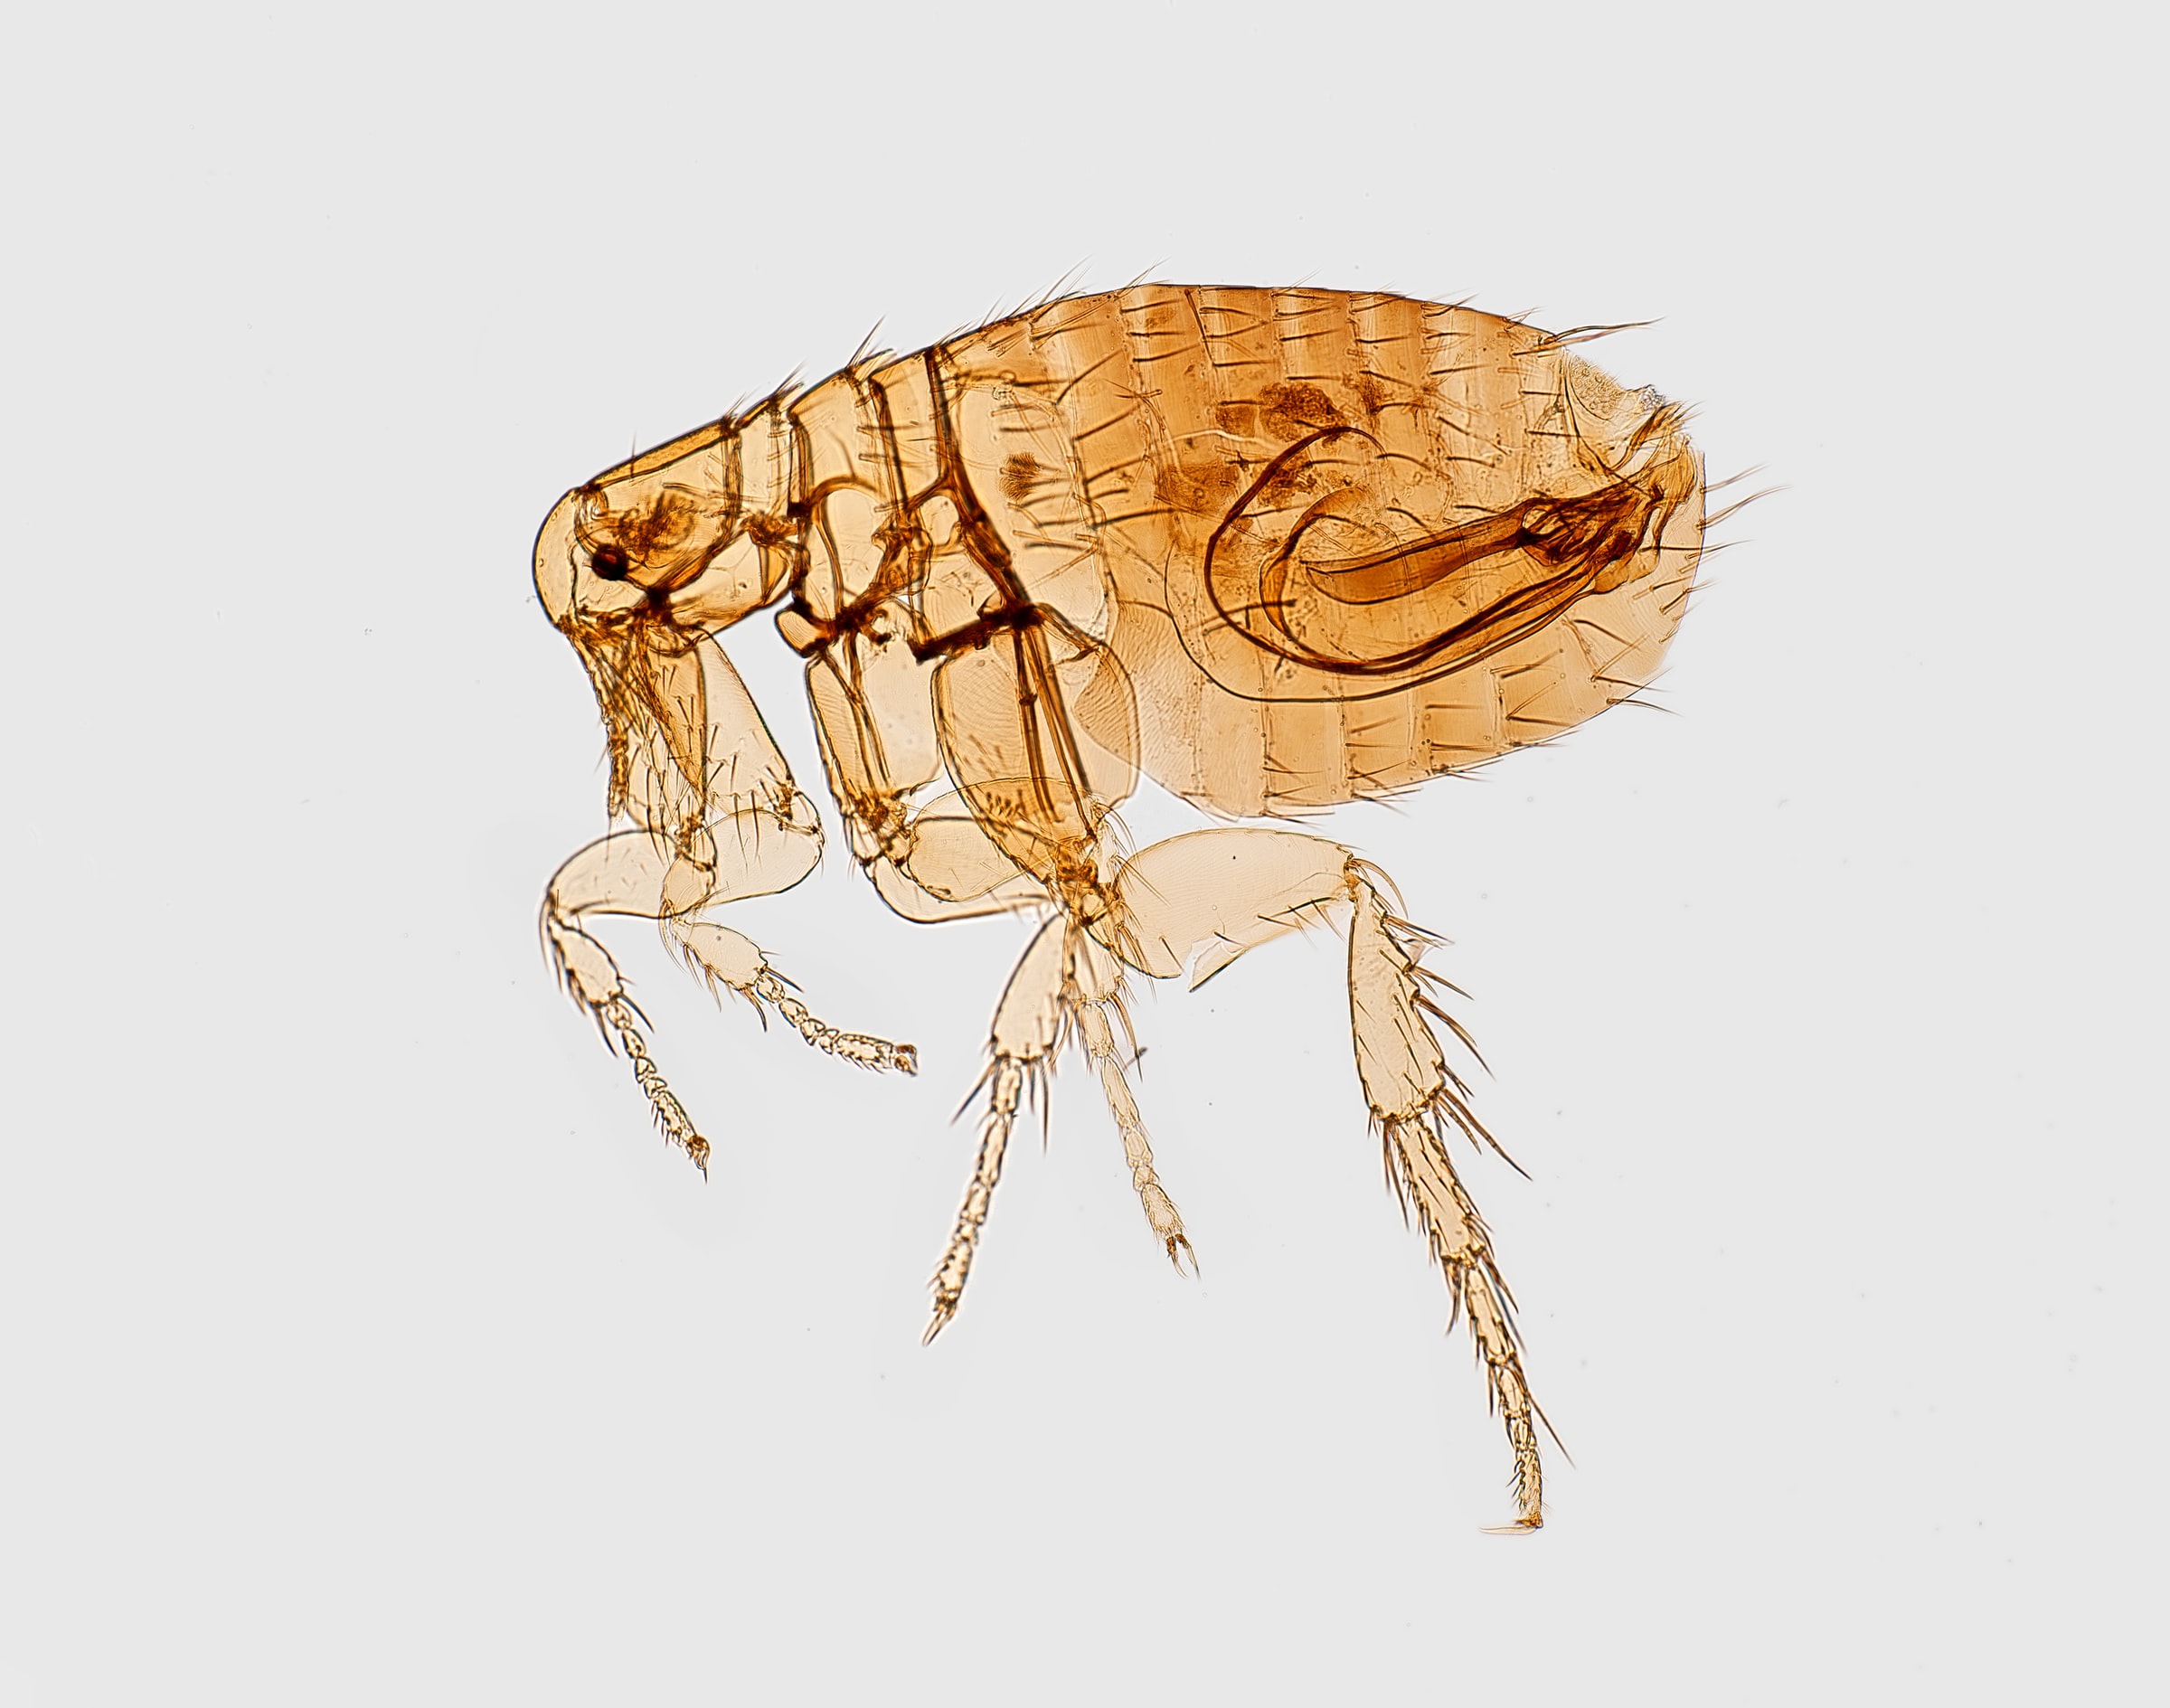 Zoomed in inspection of a brown flea